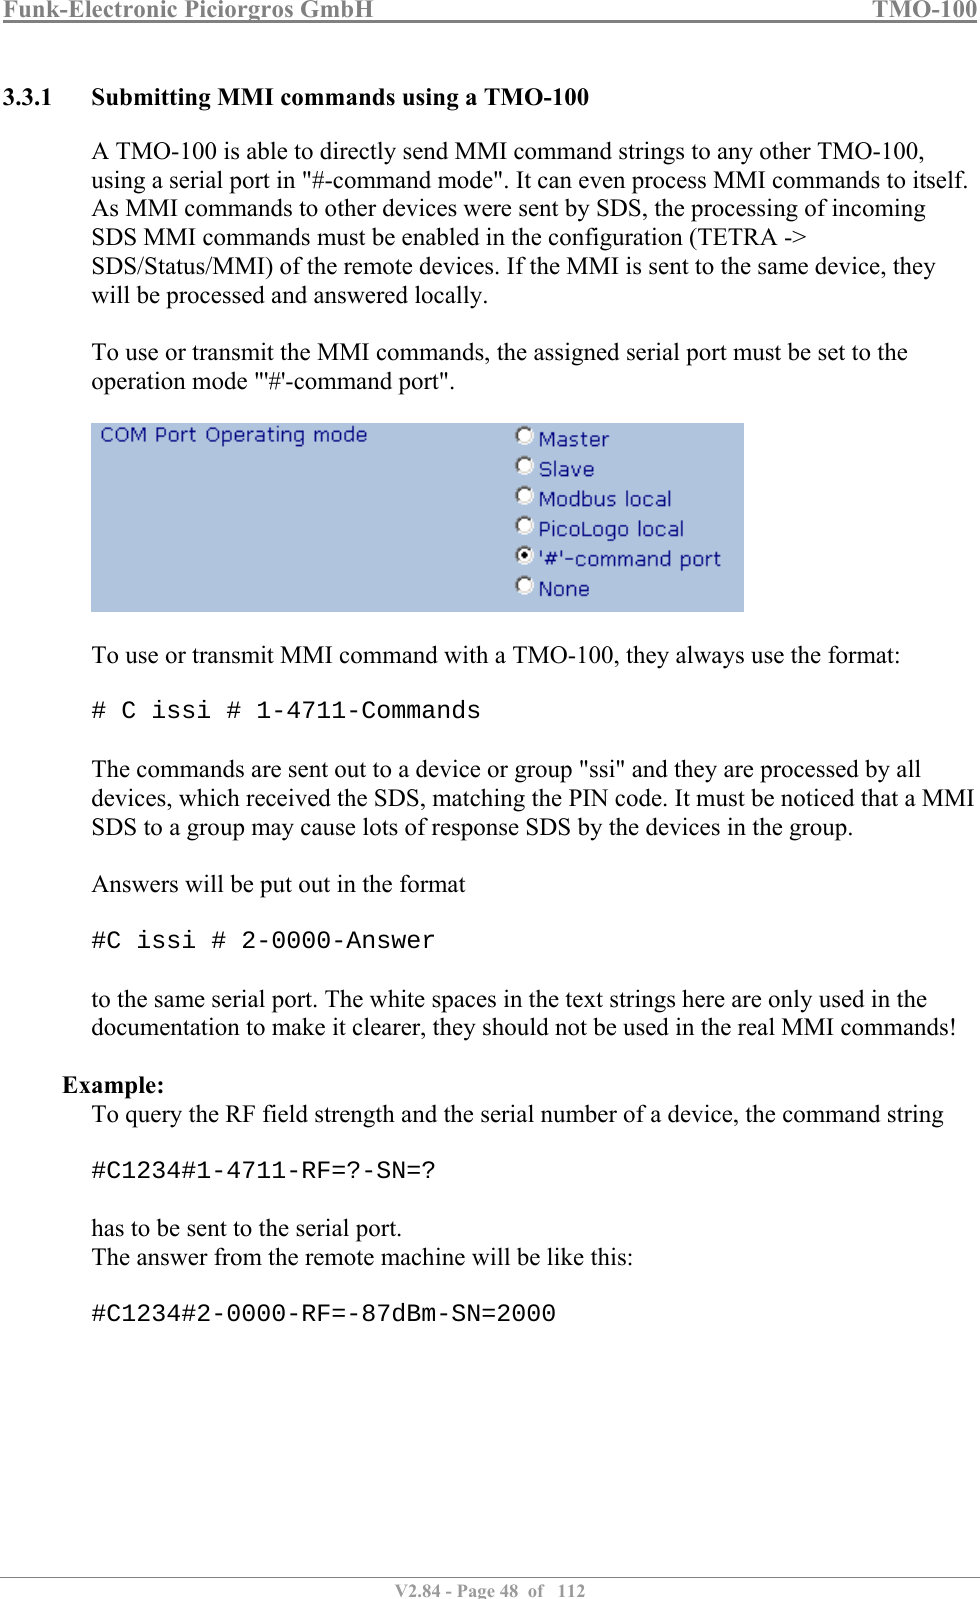 Funk-Electronic Piciorgros GmbH   TMO-100   V2.84 - Page 48  of   112   3.3.1 Submitting MMI commands using a TMO-100 A TMO-100 is able to directly send MMI command strings to any other TMO-100, using a serial port in &quot;#-command mode&quot;. It can even process MMI commands to itself. As MMI commands to other devices were sent by SDS, the processing of incoming SDS MMI commands must be enabled in the configuration (TETRA -&gt; SDS/Status/MMI) of the remote devices. If the MMI is sent to the same device, they will be processed and answered locally.  To use or transmit the MMI commands, the assigned serial port must be set to the operation mode &quot;&apos;#&apos;-command port&quot;.    To use or transmit MMI command with a TMO-100, they always use the format:  # C issi # 1-4711-Commands  The commands are sent out to a device or group &quot;ssi&quot; and they are processed by all devices, which received the SDS, matching the PIN code. It must be noticed that a MMI SDS to a group may cause lots of response SDS by the devices in the group.  Answers will be put out in the format  #C issi # 2-0000-Answer  to the same serial port. The white spaces in the text strings here are only used in the documentation to make it clearer, they should not be used in the real MMI commands!  Example: To query the RF field strength and the serial number of a device, the command string  #C1234#1-4711-RF=?-SN=?  has to be sent to the serial port. The answer from the remote machine will be like this:  #C1234#2-0000-RF=-87dBm-SN=2000  